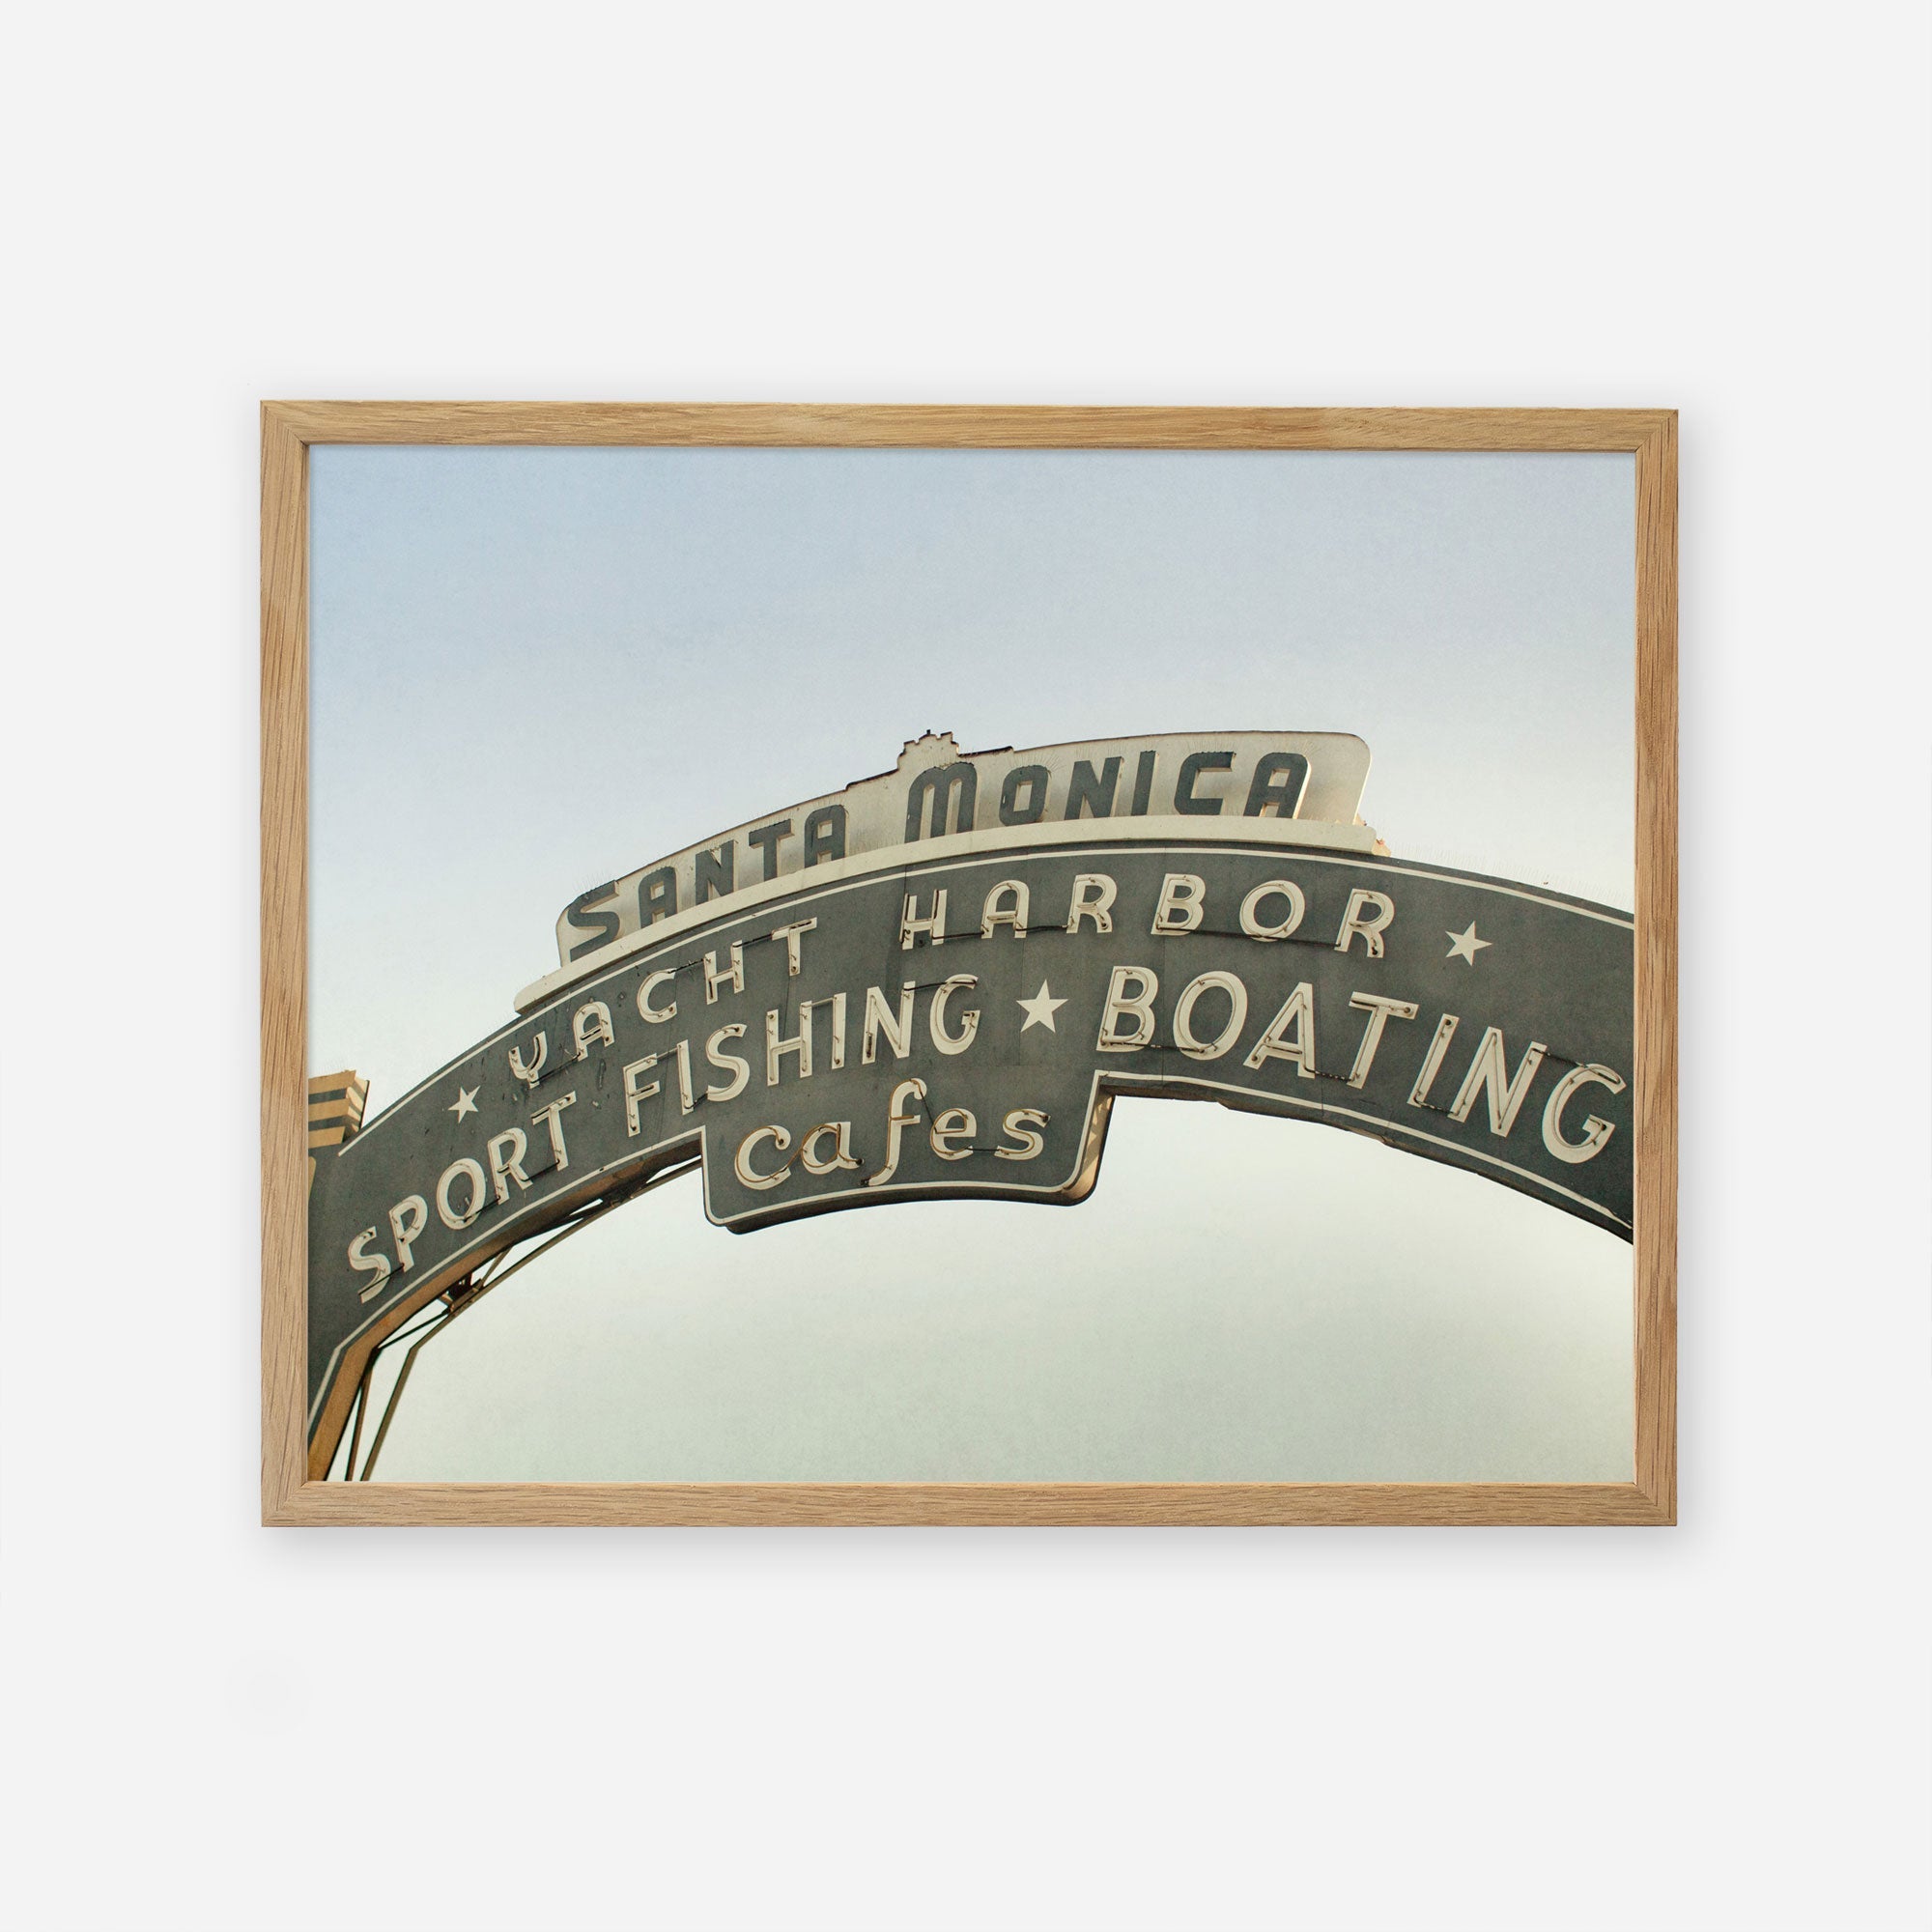 A framed archival photographic print of the iconic Santa Monica yacht harbor sign, featuring words like &quot;sport fishing,&quot; &quot;boating,&quot; and &quot;cafes&quot; on an arched metallic structure, against a plain Offley Green Los Angeles California Print, &#39;Santa Monica Pier Blues&#39;